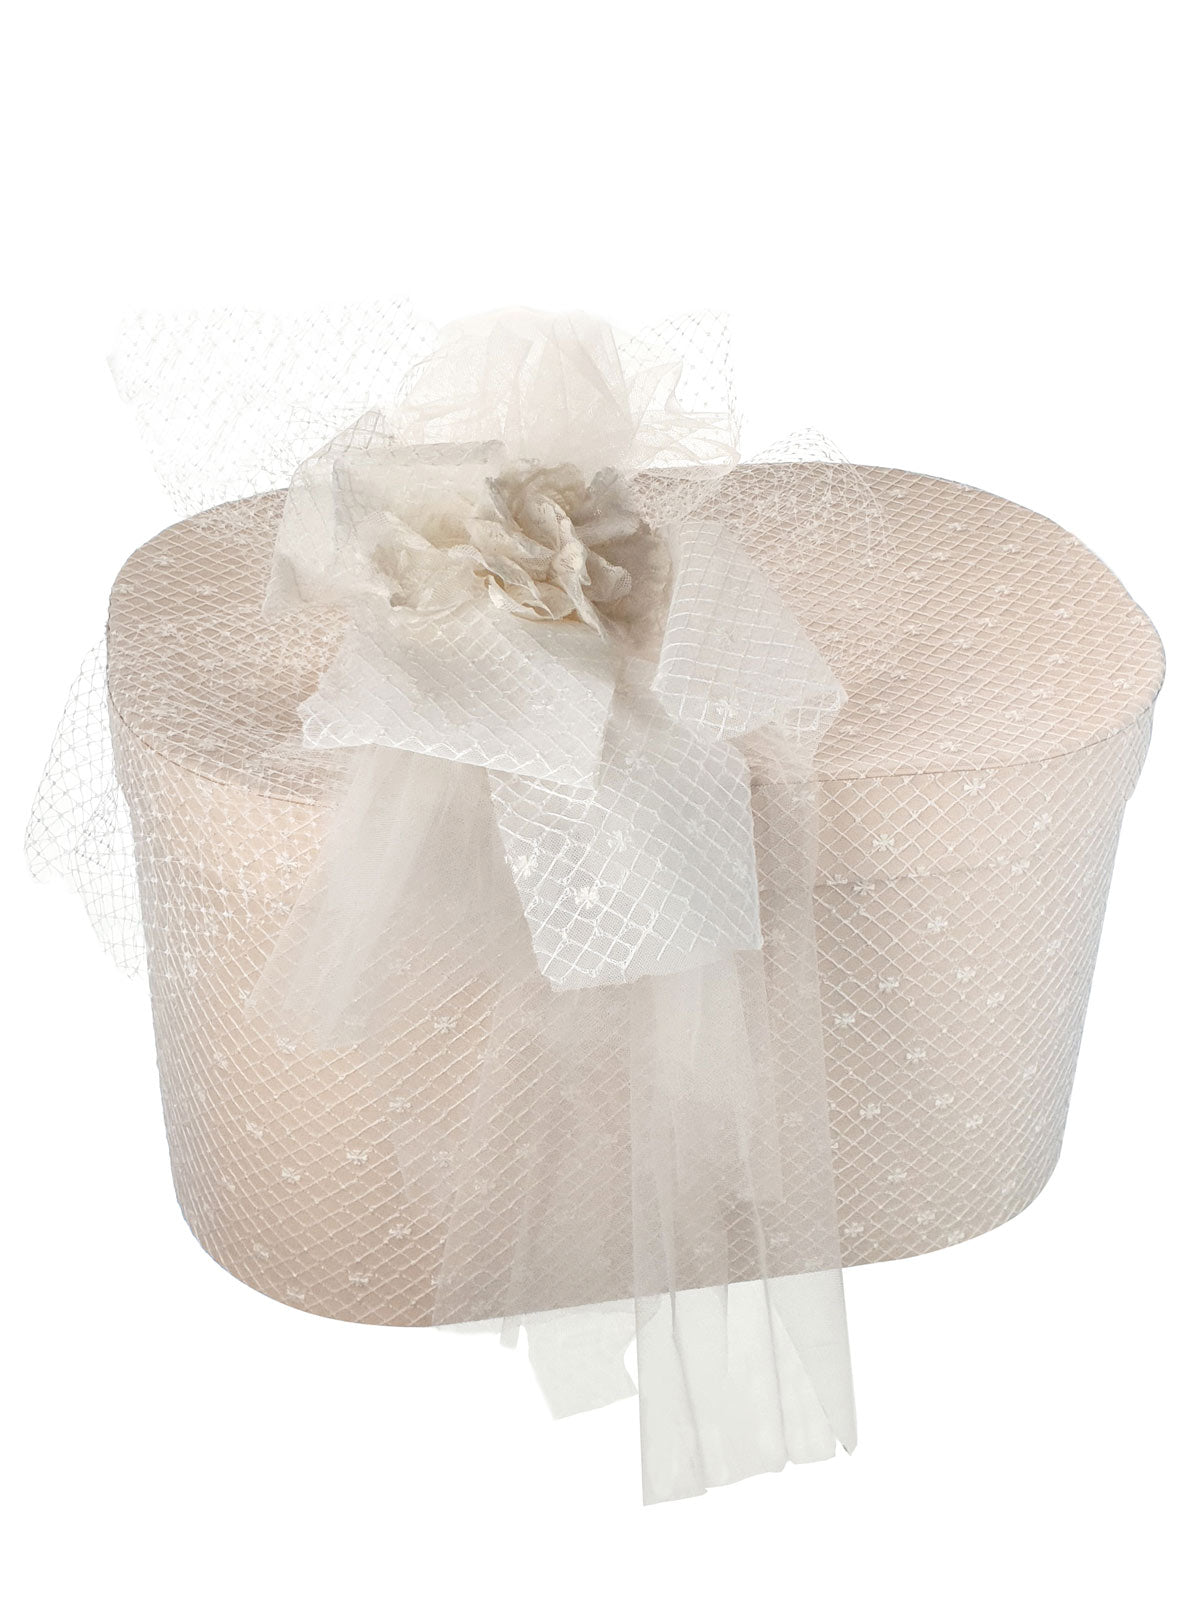 Baptism box with embroidered tulle - AMBITION